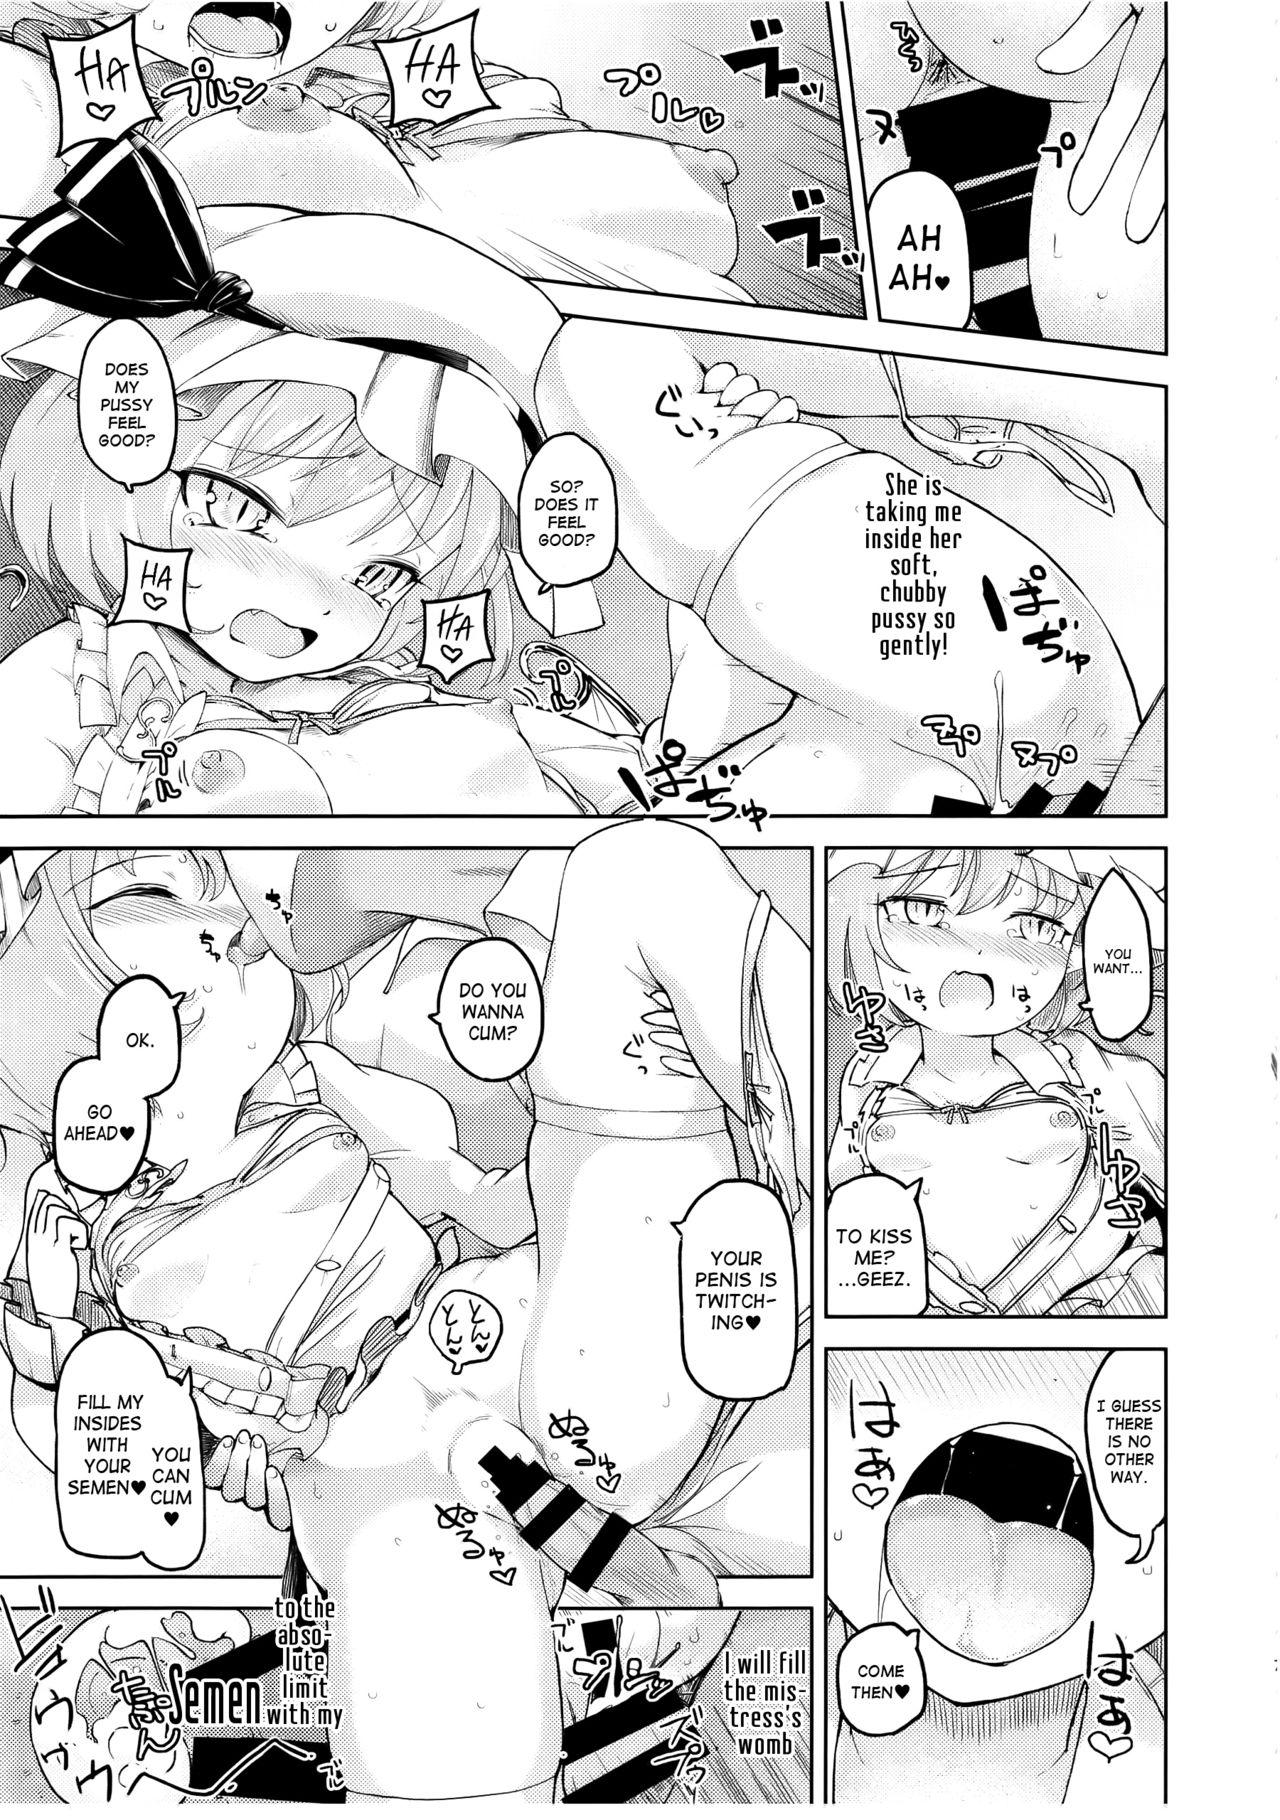 Hot Girls Fucking Aisare Scarlet - Touhou project Gilf - Page 6